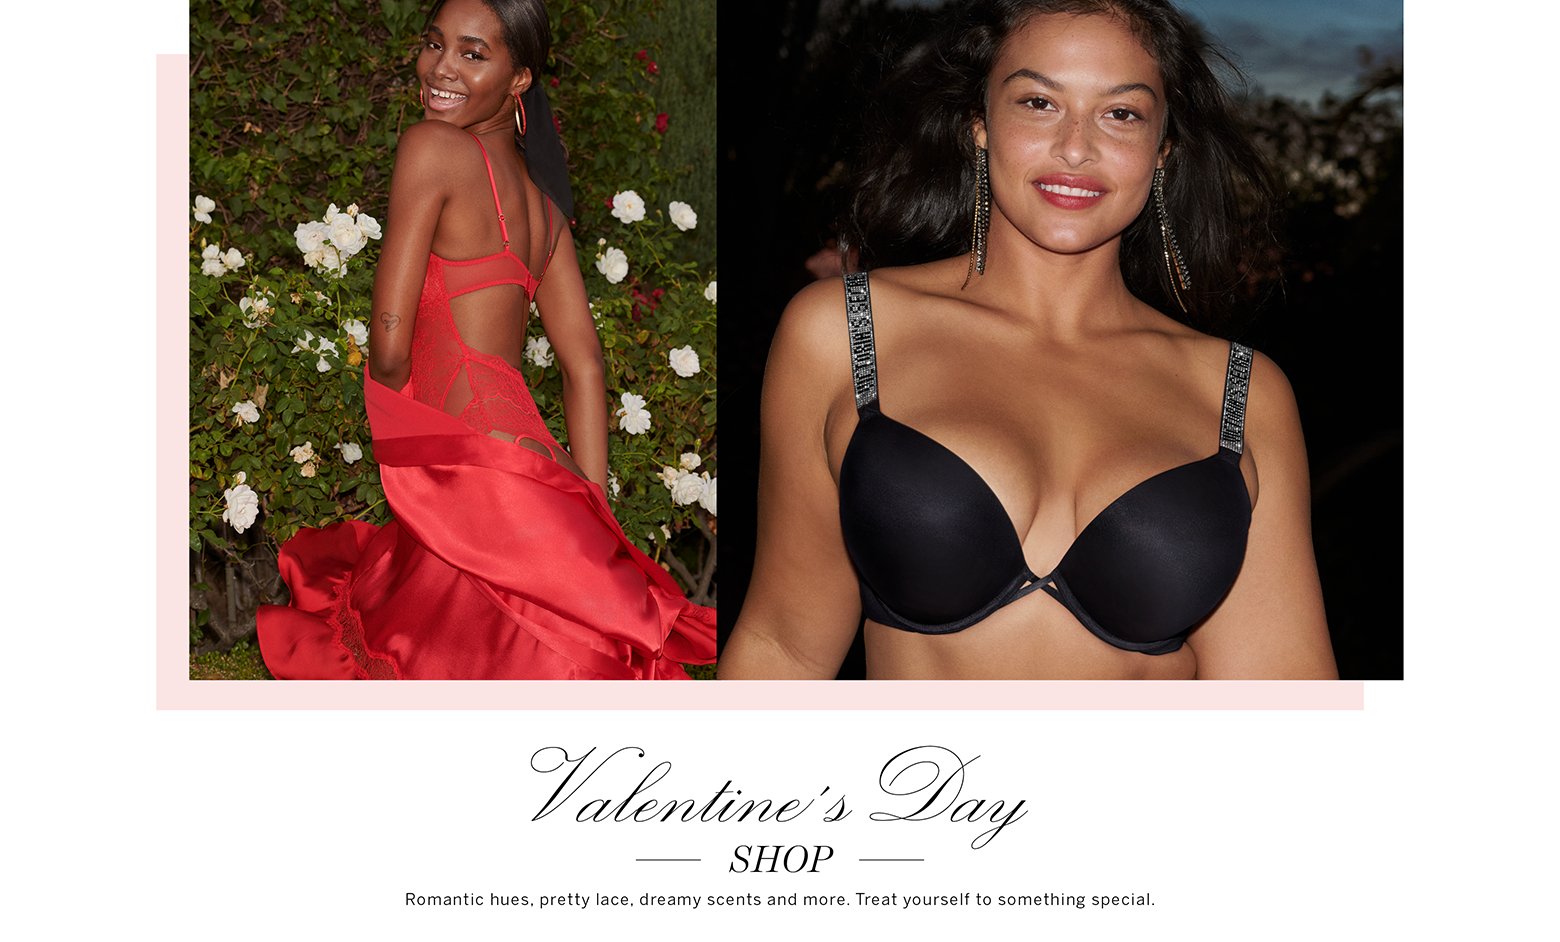 Valentines Day Shop. Romantic hues, pretty lace, dreamy scents and more. Treat yourself to something special.